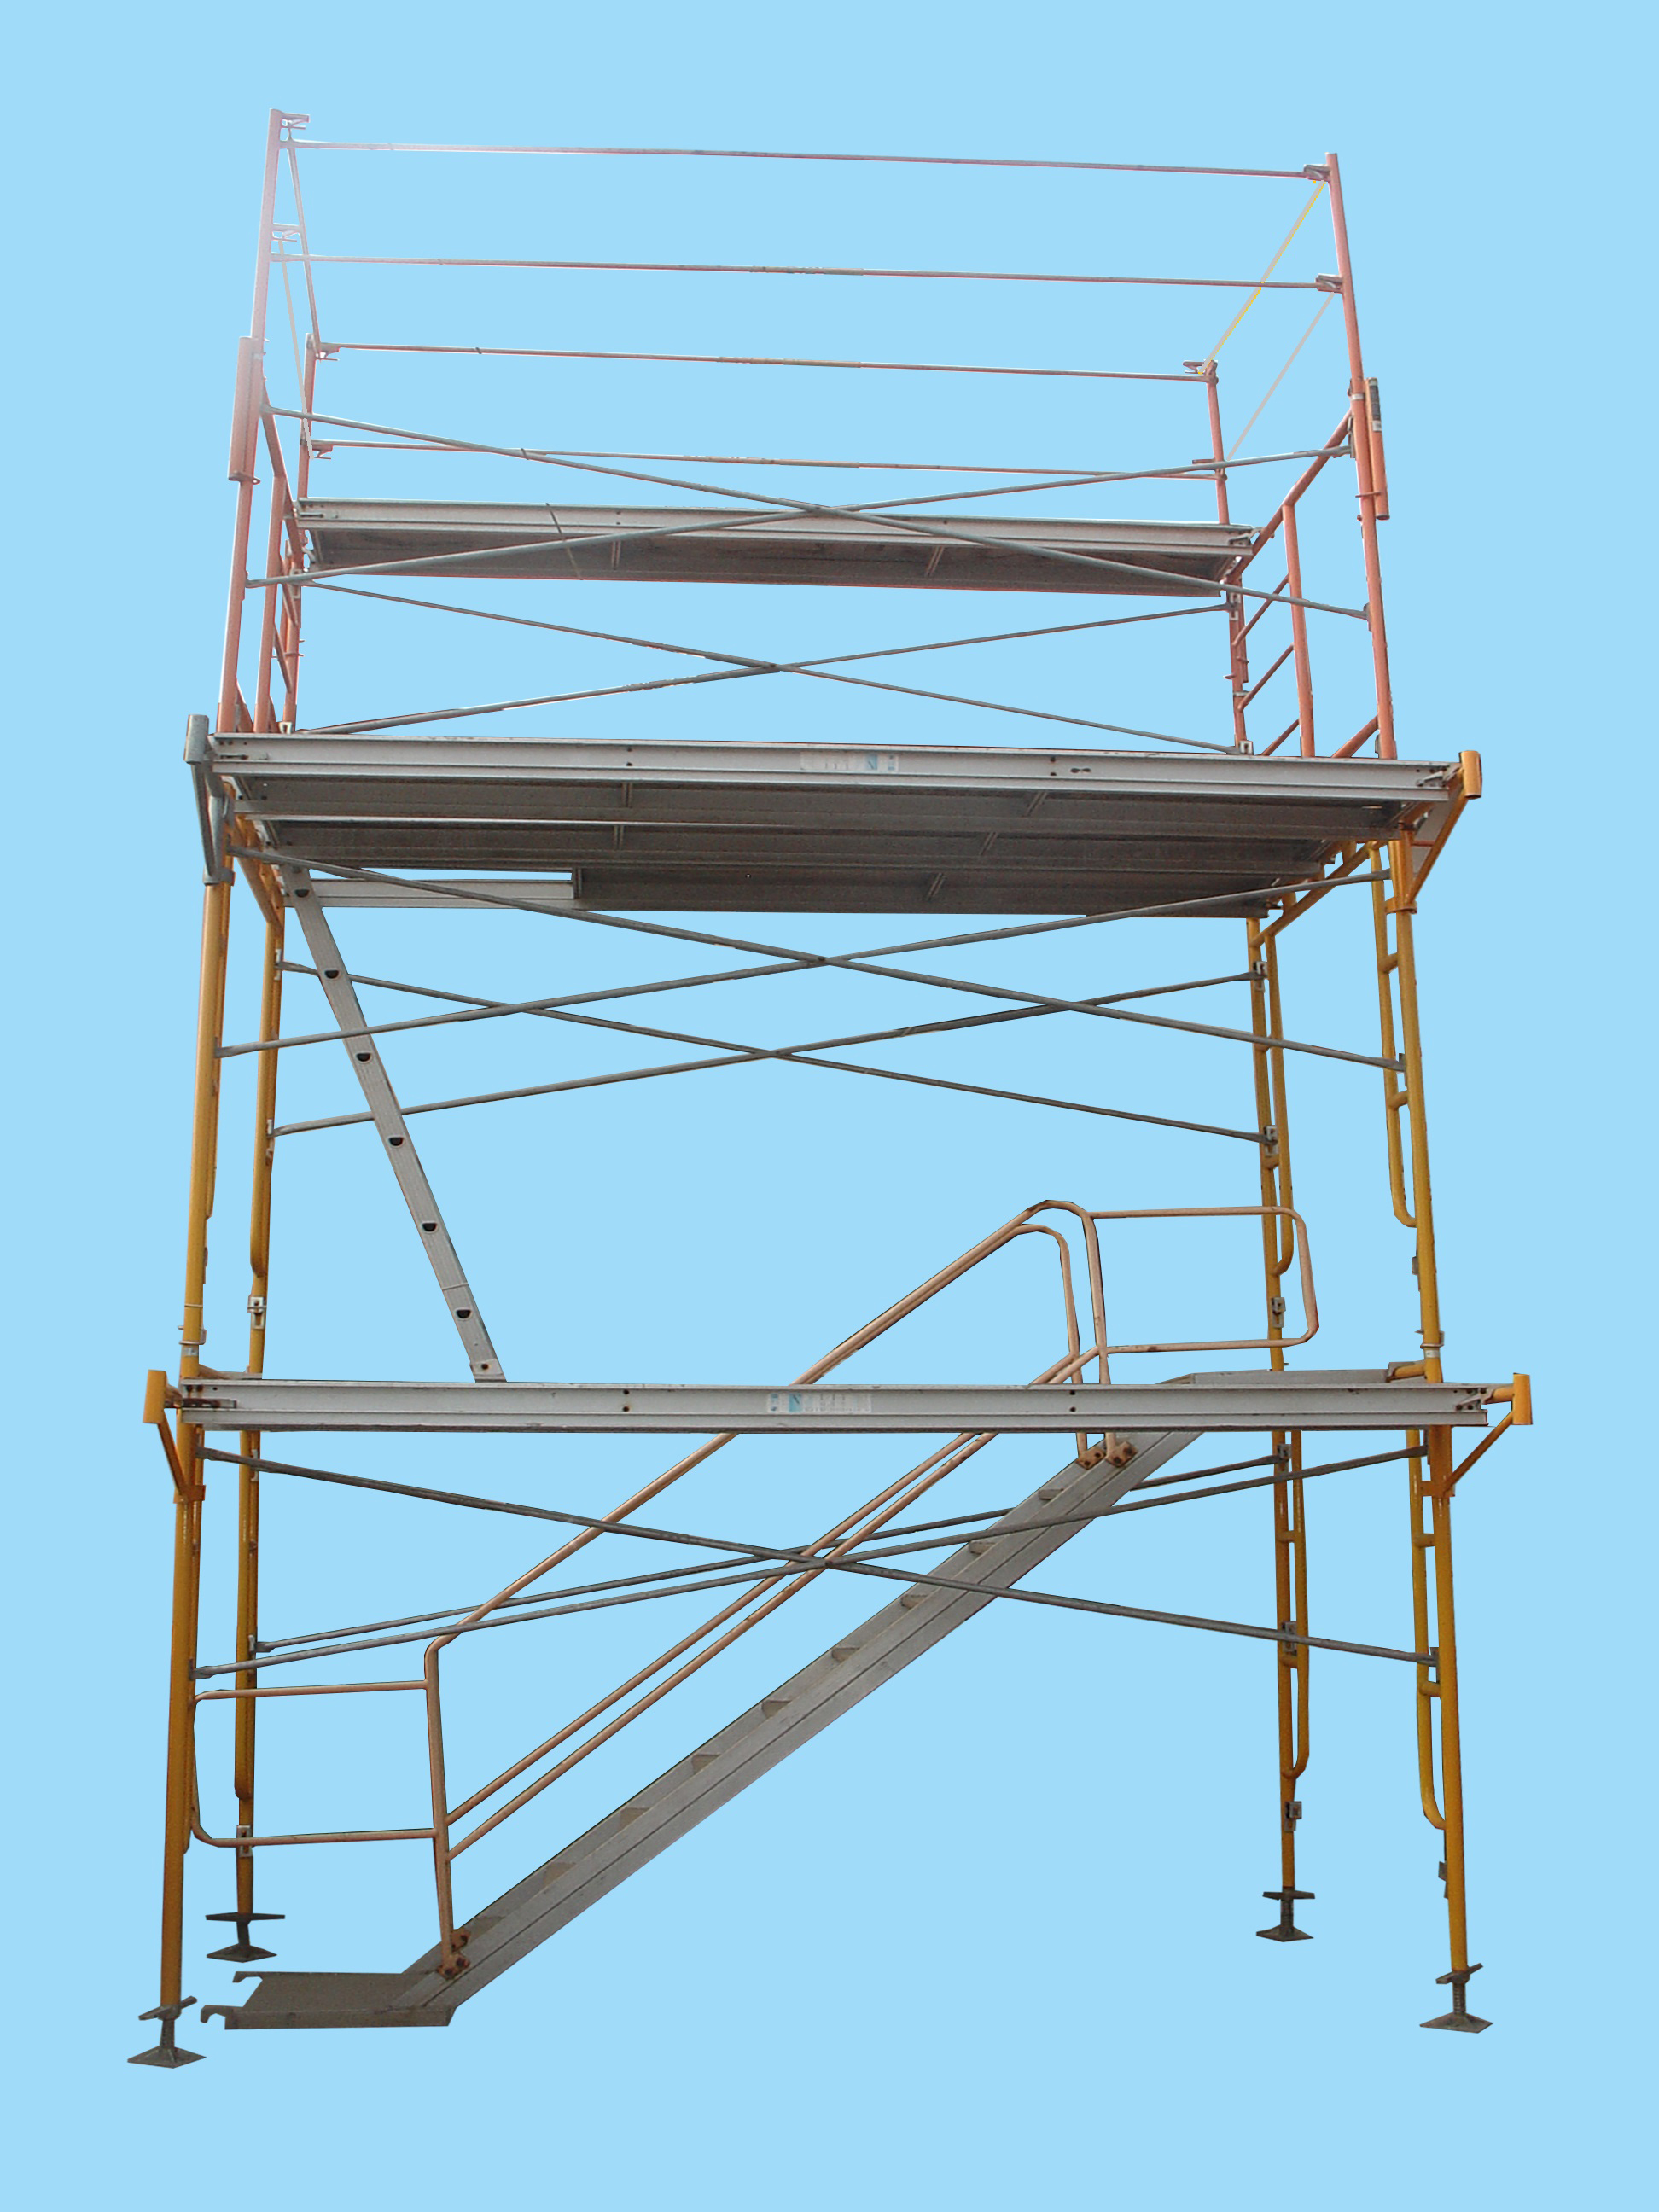 Frame scaffolding and accessories